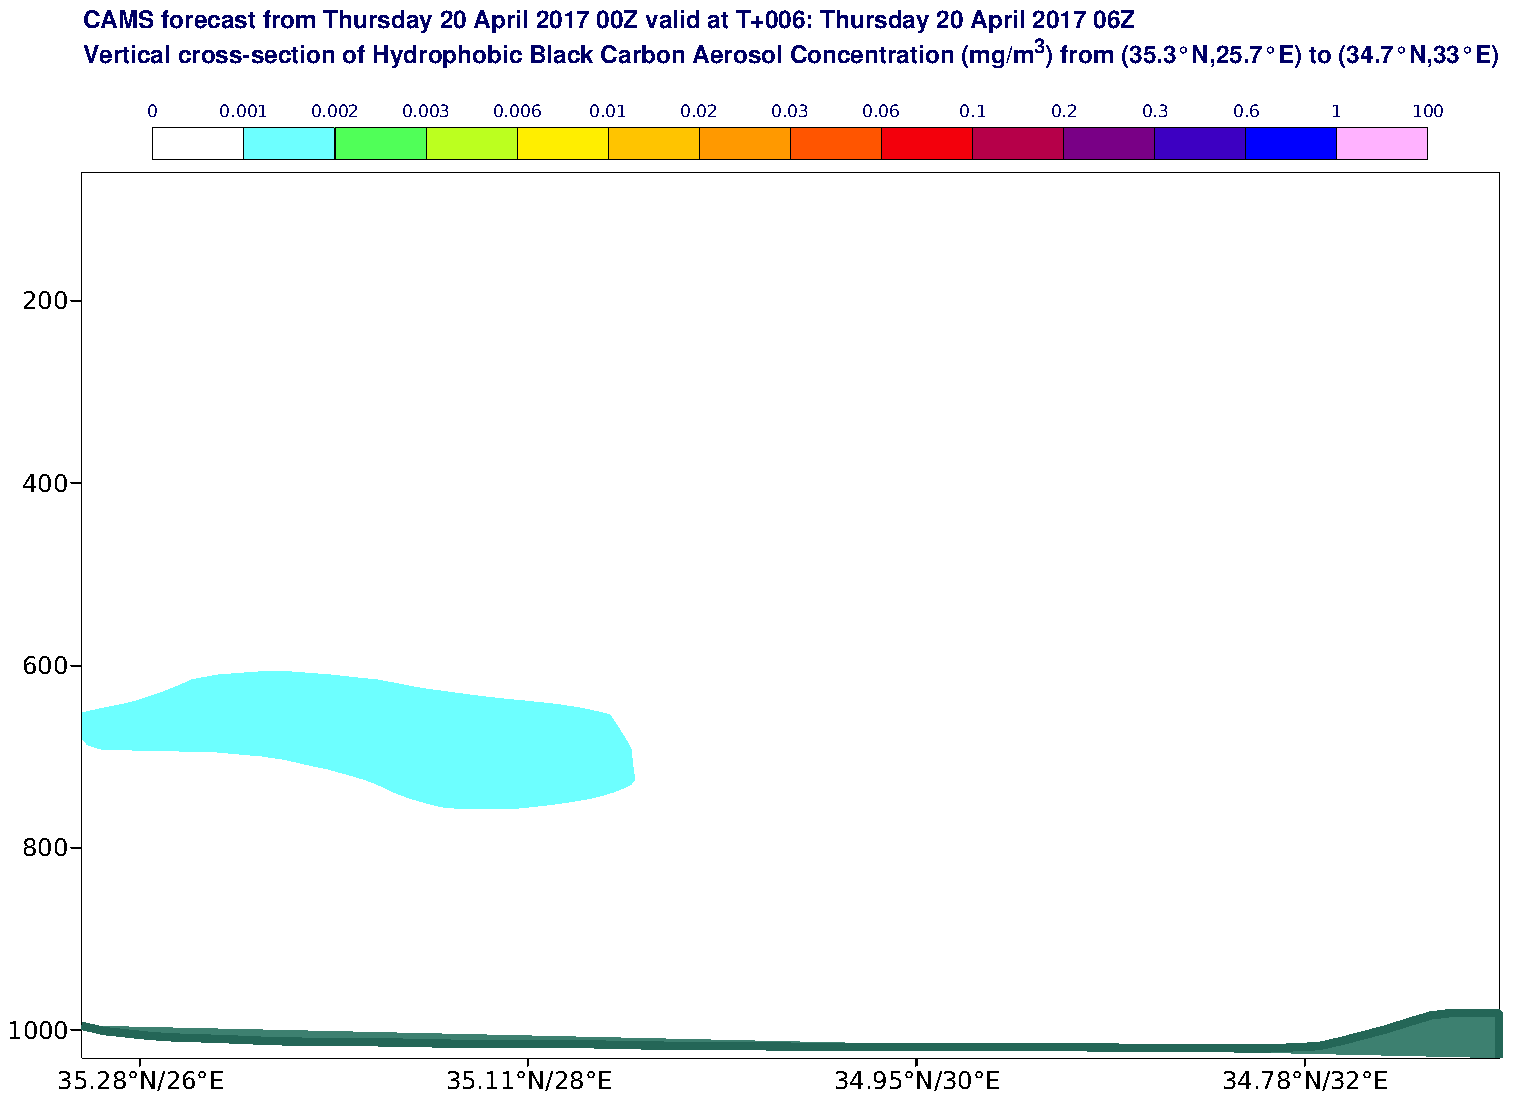 Vertical cross-section of Hydrophobic Black Carbon Aerosol Concentration (mg/m3) valid at T6 - 2017-04-20 06:00